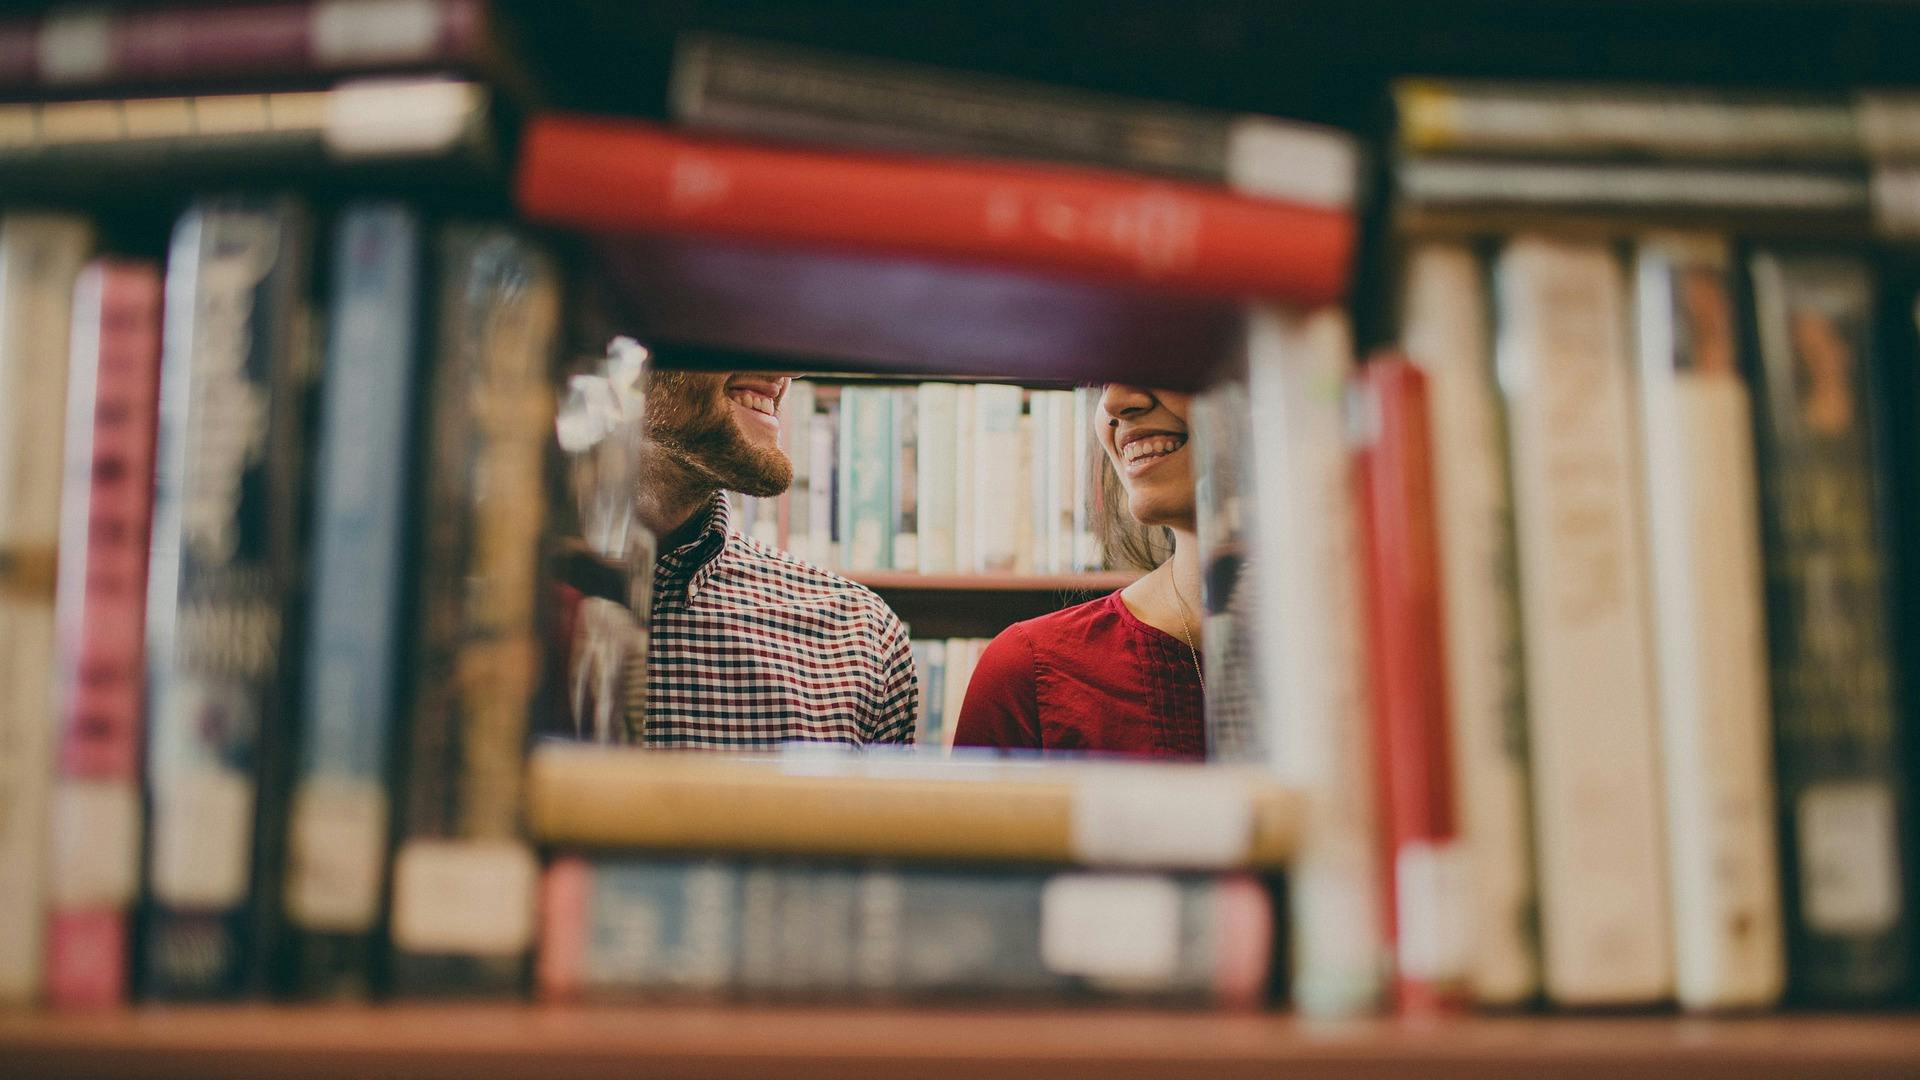 two students smiling visible through gap in library stacks